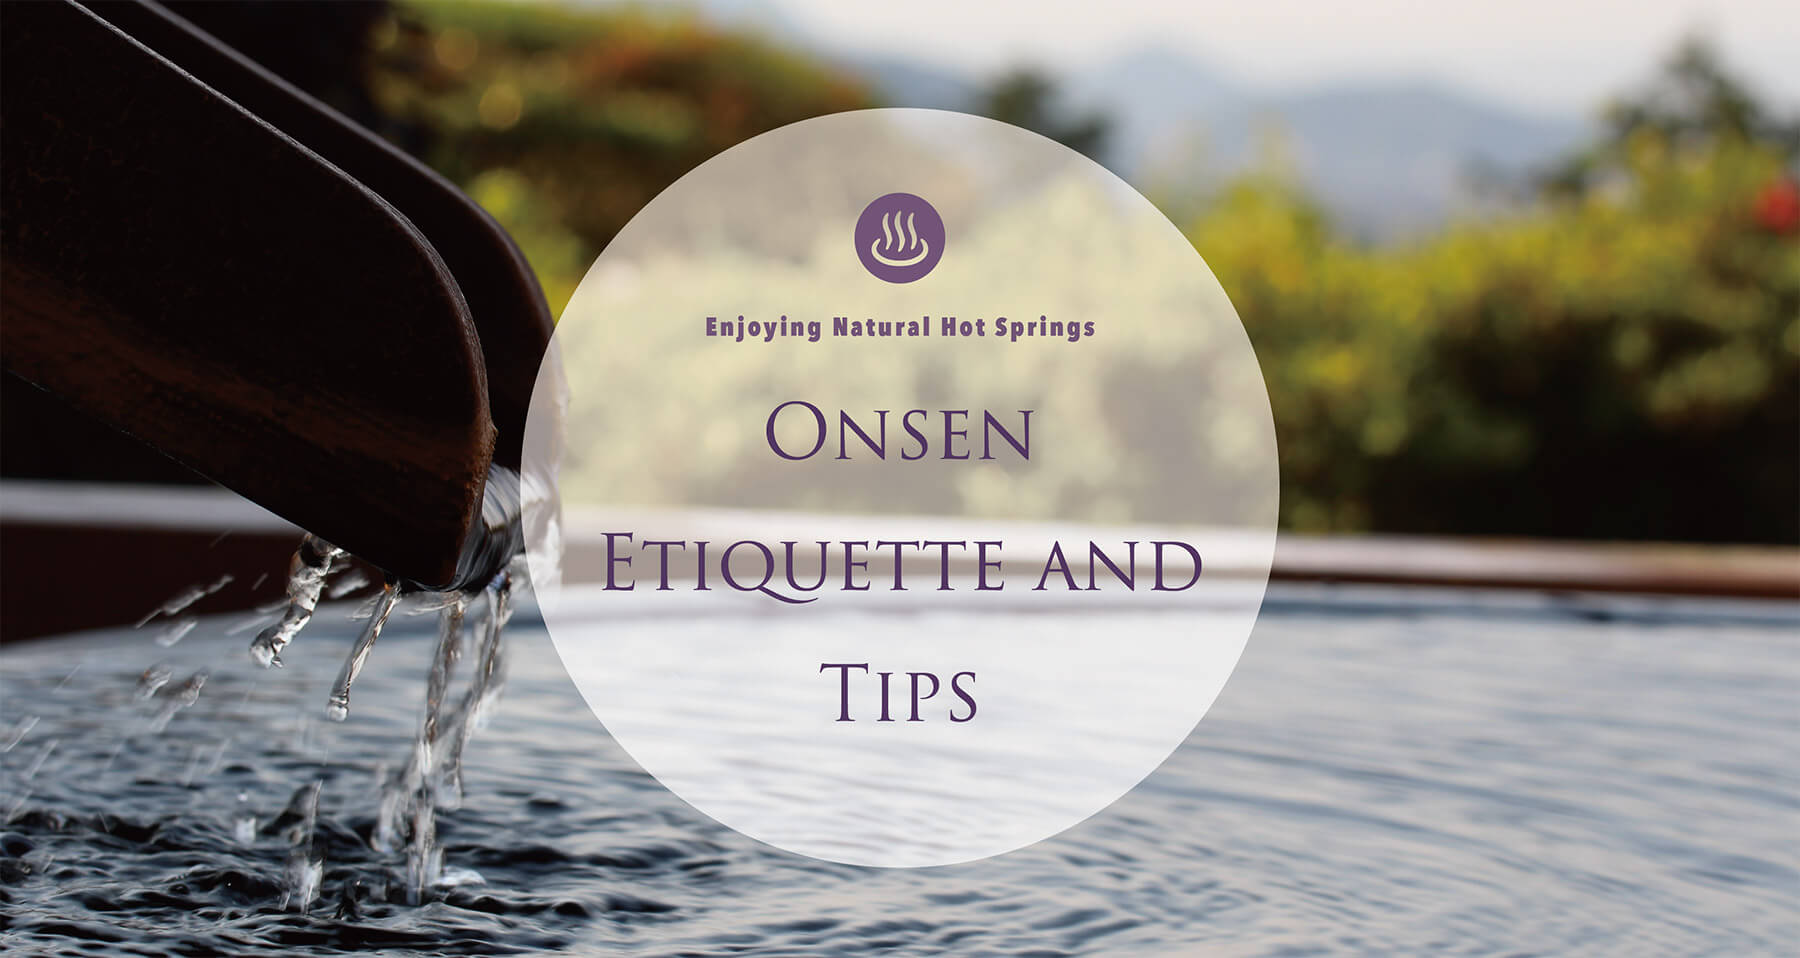 Enjoying Natural Hot Springs, ONSEN ETIQUETTE AND TIPS